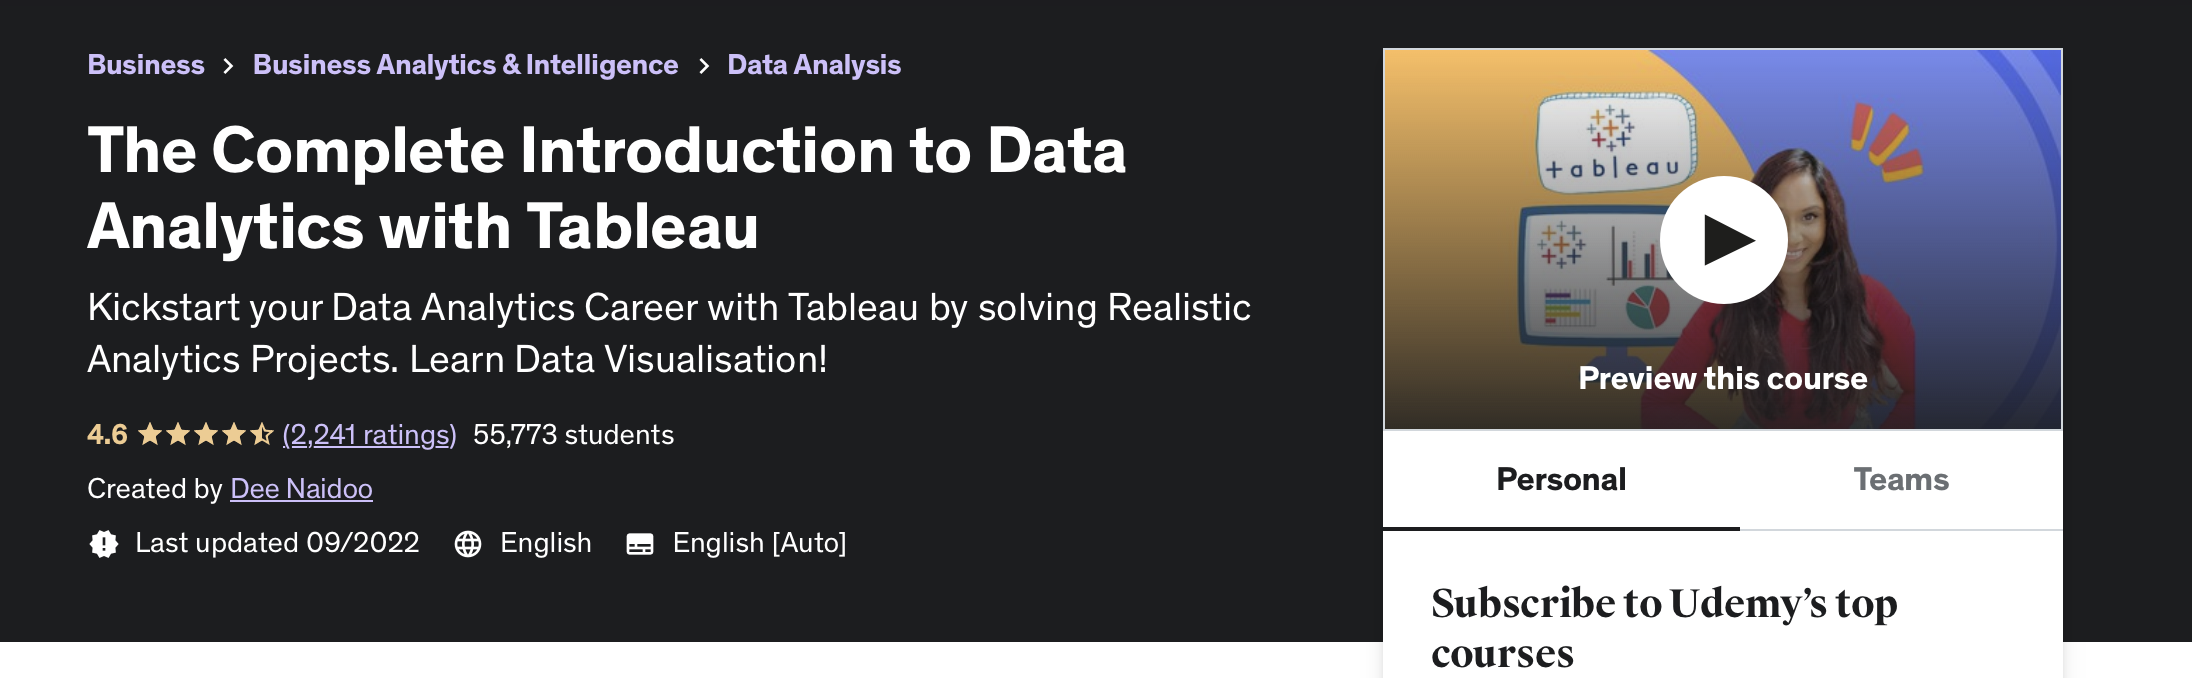 The Complete Introduction to Data Analytics with Tableau